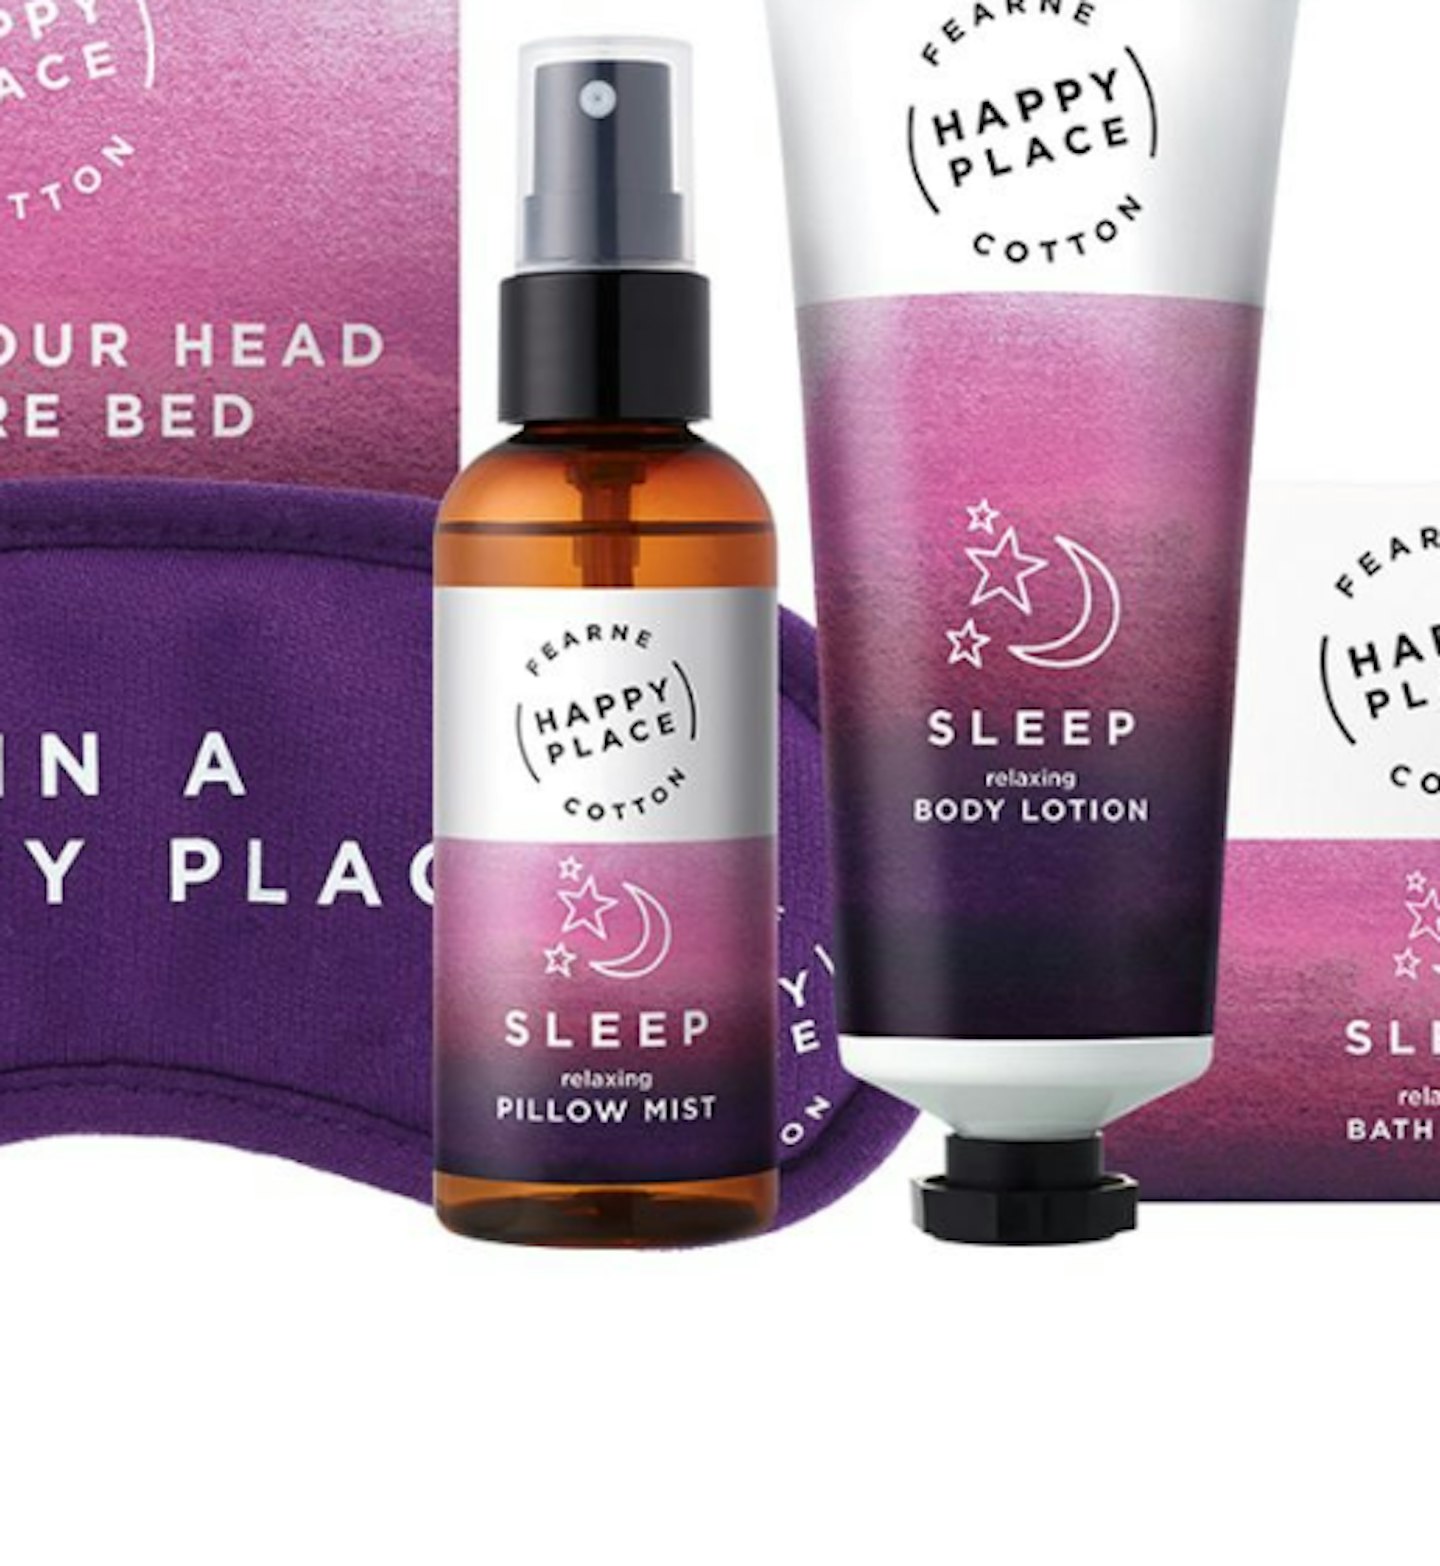 Happy Place by Fearne Cotton Sleep Collection, £20